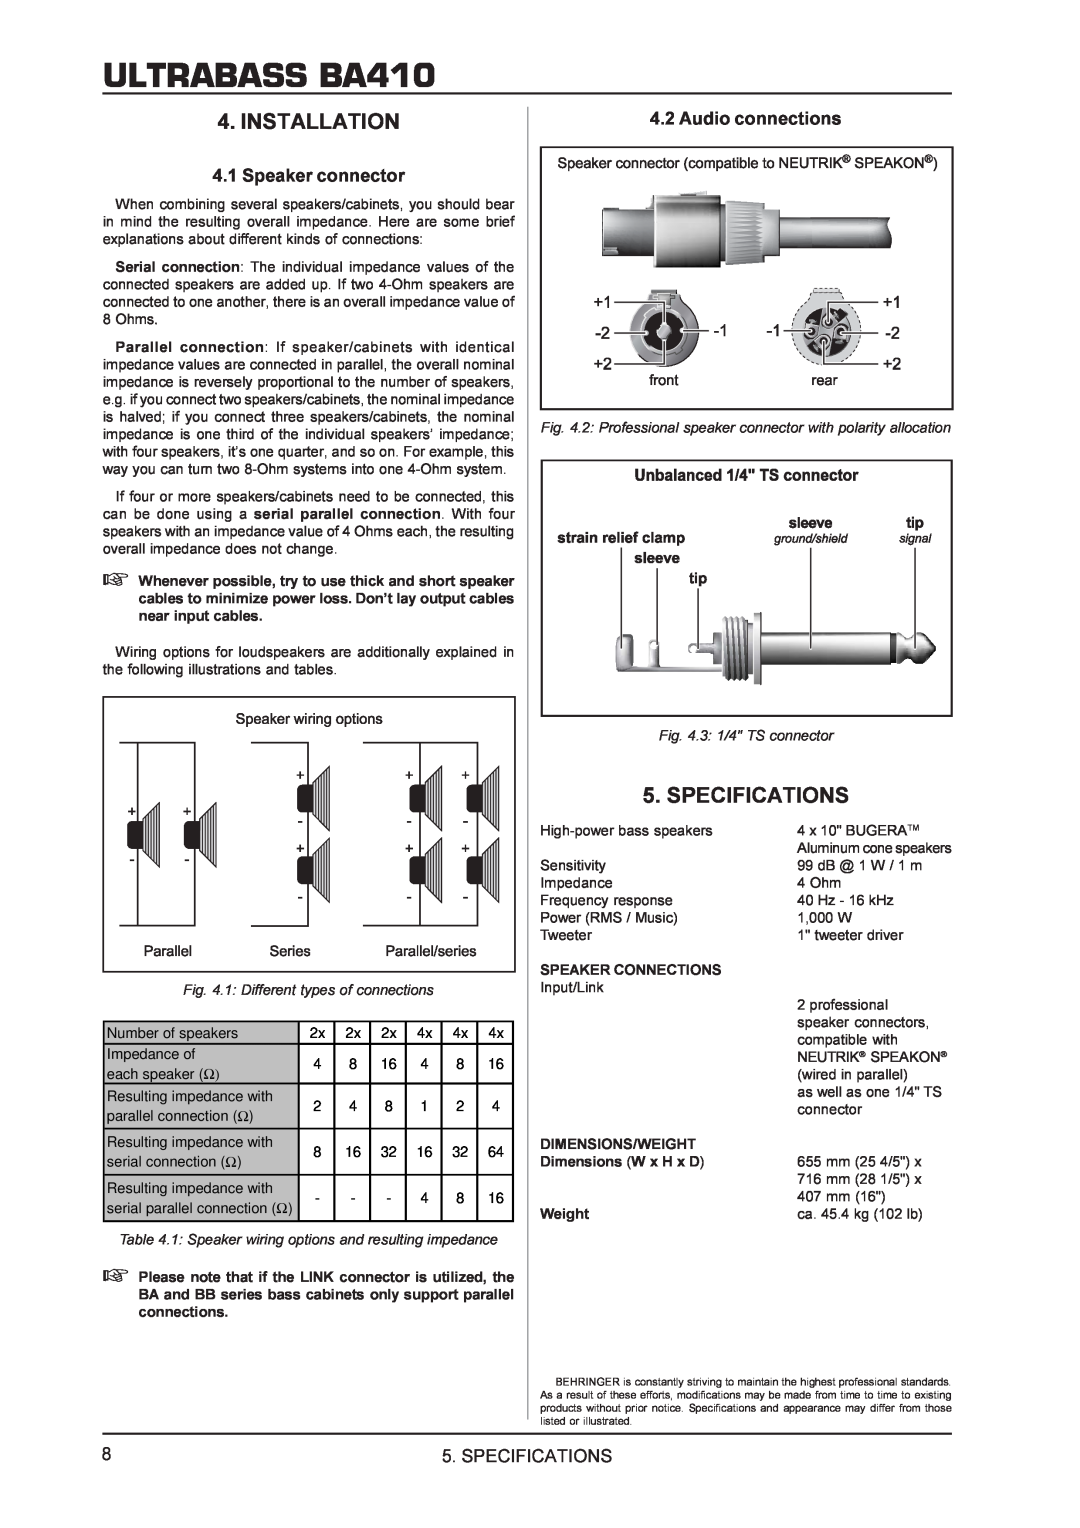 Behringer manual Installation, Specifications, ULTRABASS BA410, 1 Different types of connections, 3 1/4 TS connector 